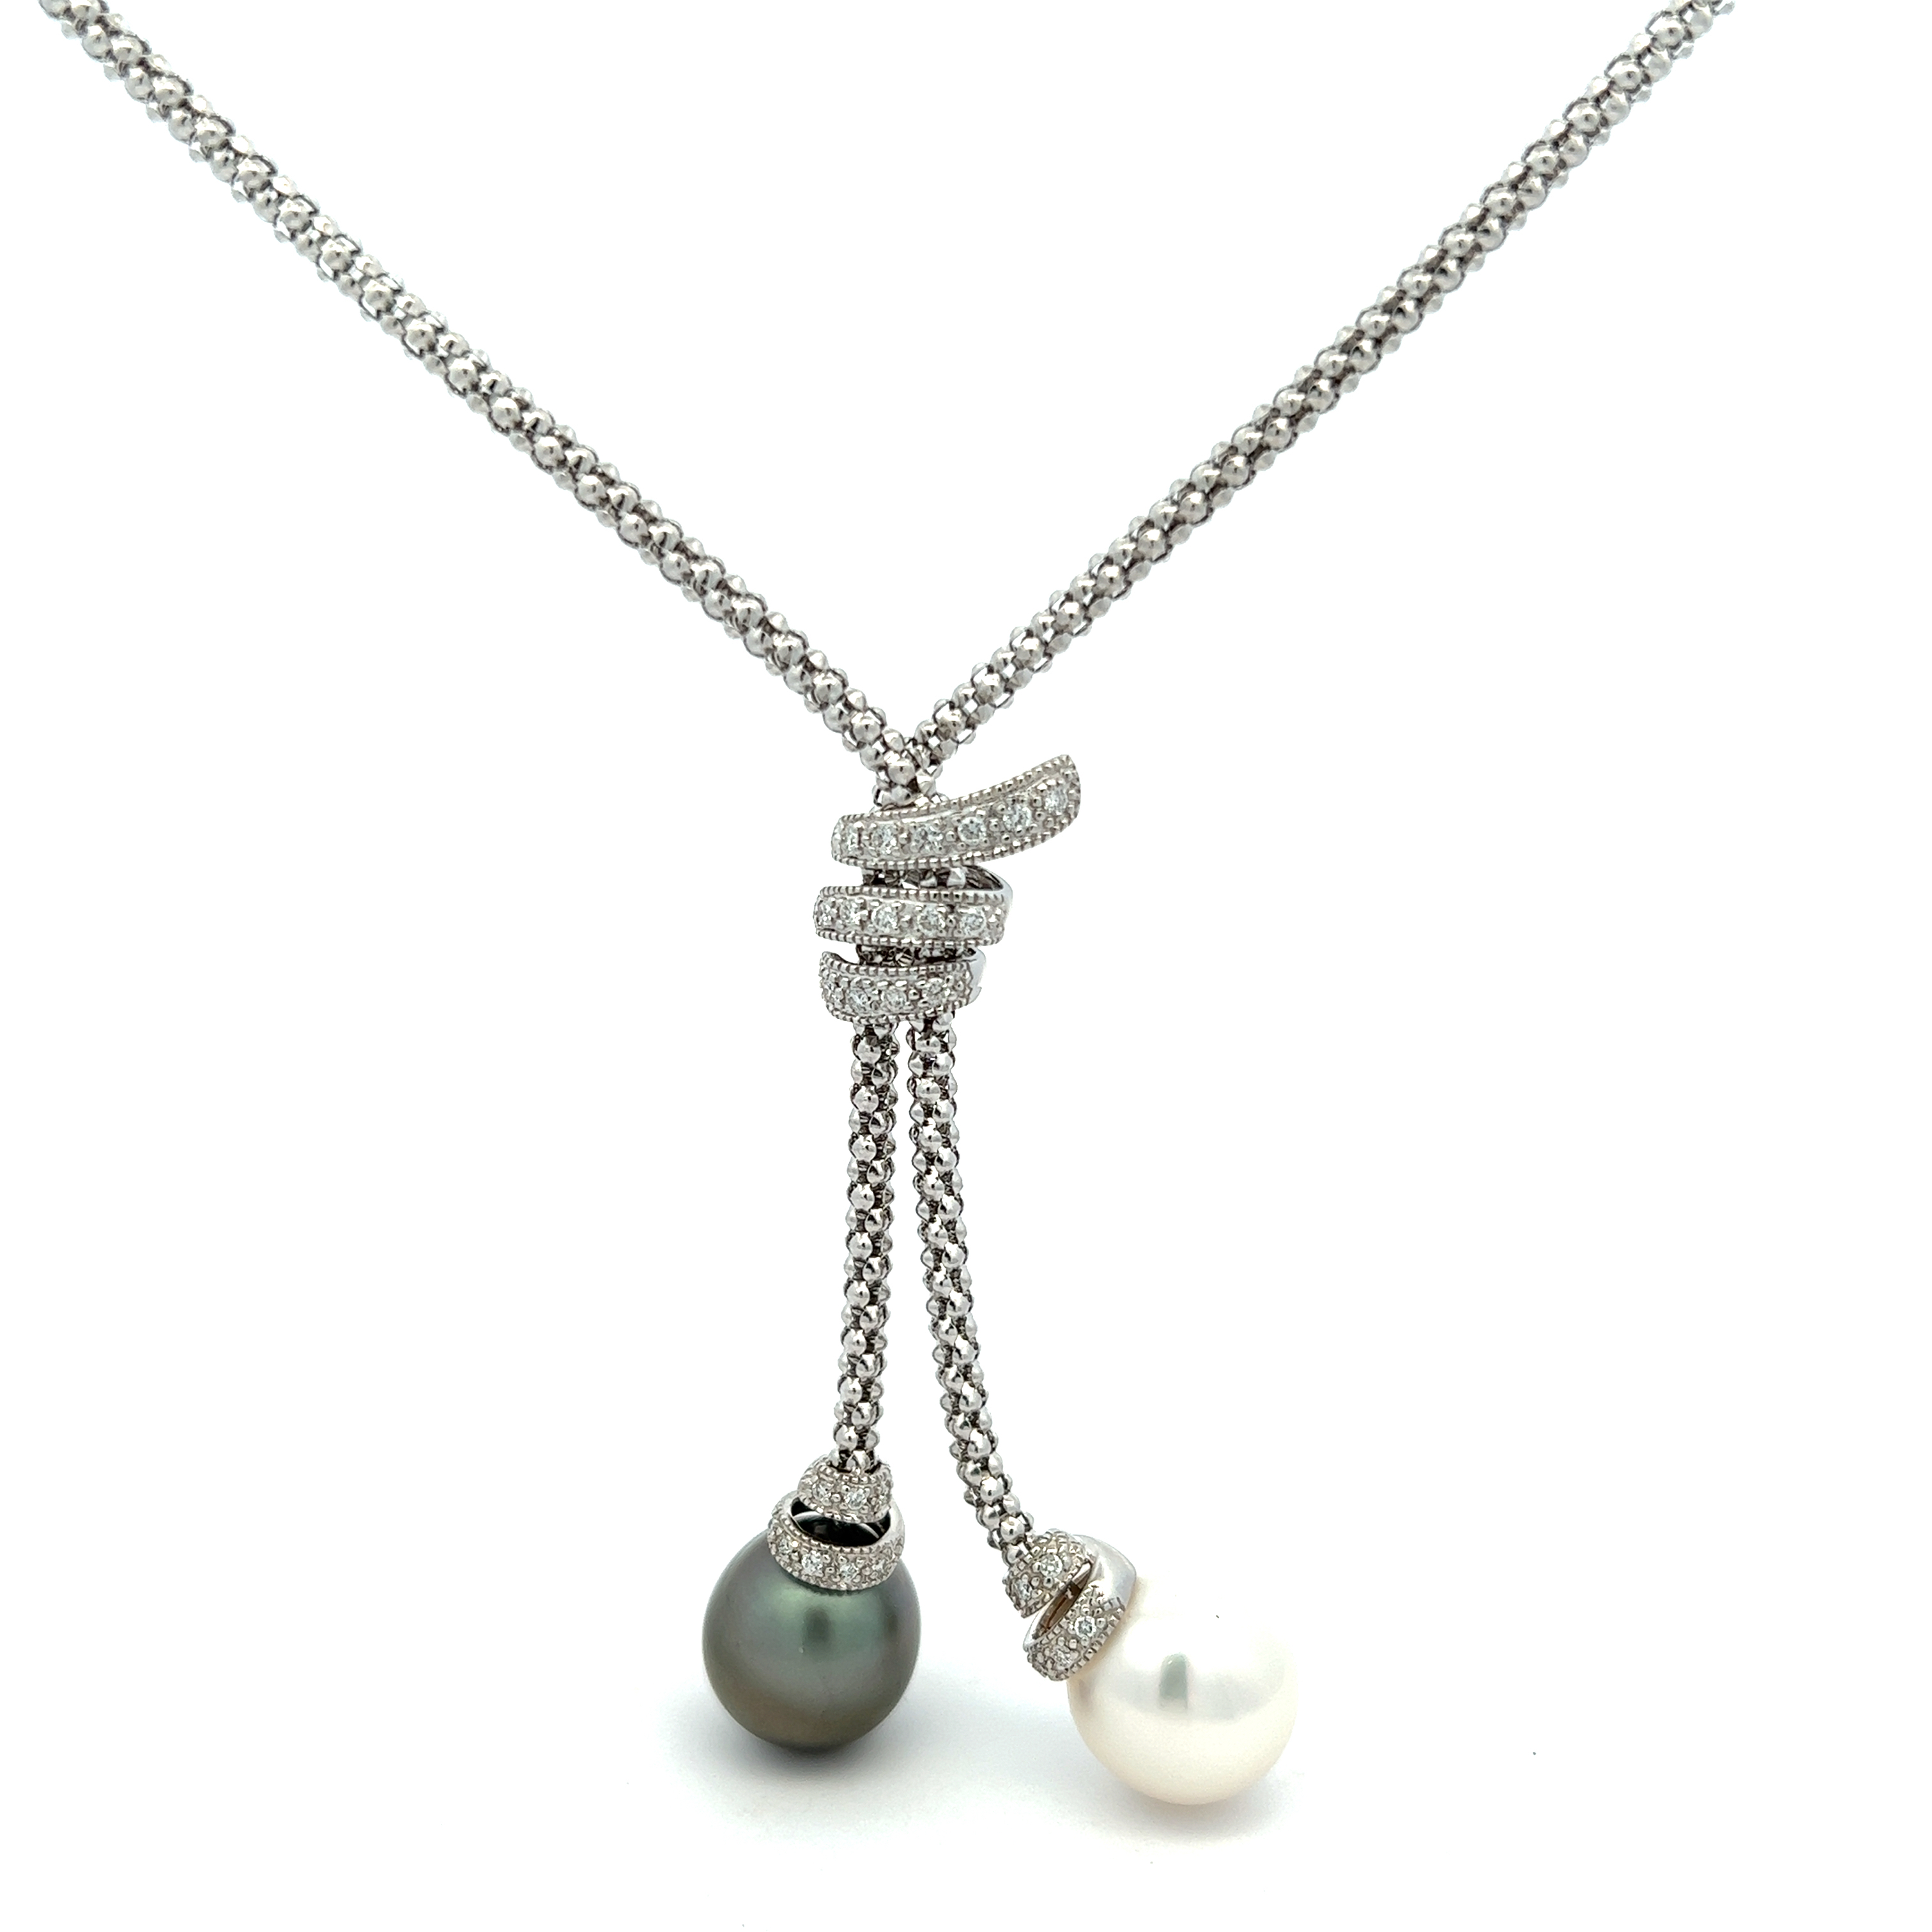 18 Karat white gold necklace with One 12.50mm South Sea Pearl  One 12.60mm Tahitian Pearl and 31=0.30 total weight round brilliant G SI Diamonds